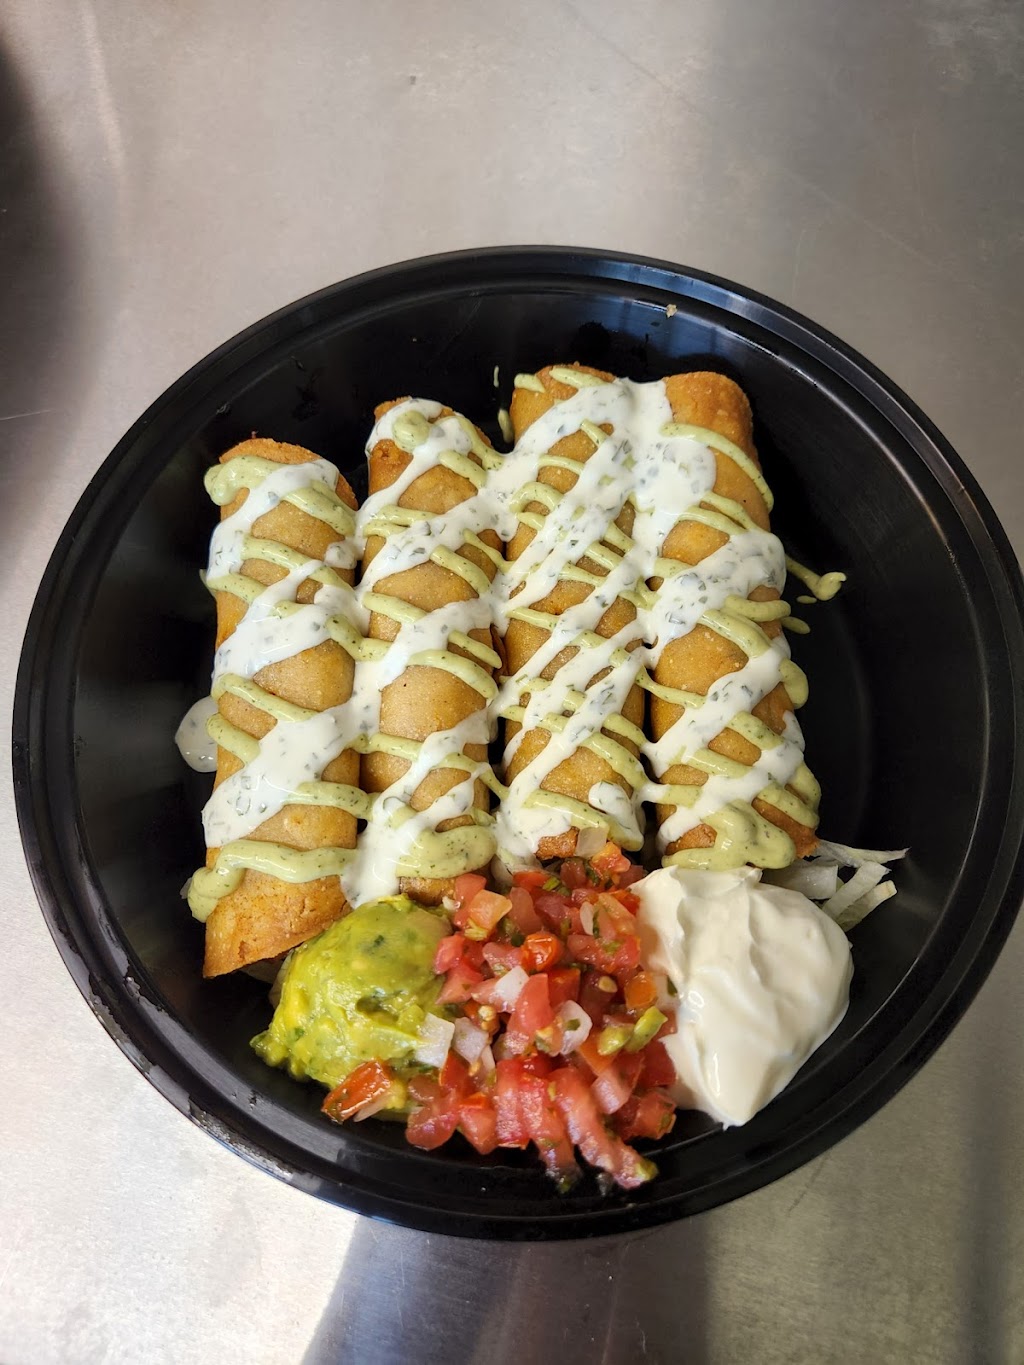 TEXMEX FUSION | 44 New Haven Rd, Seymour, CT 06483 | Phone: (203) 828-7249